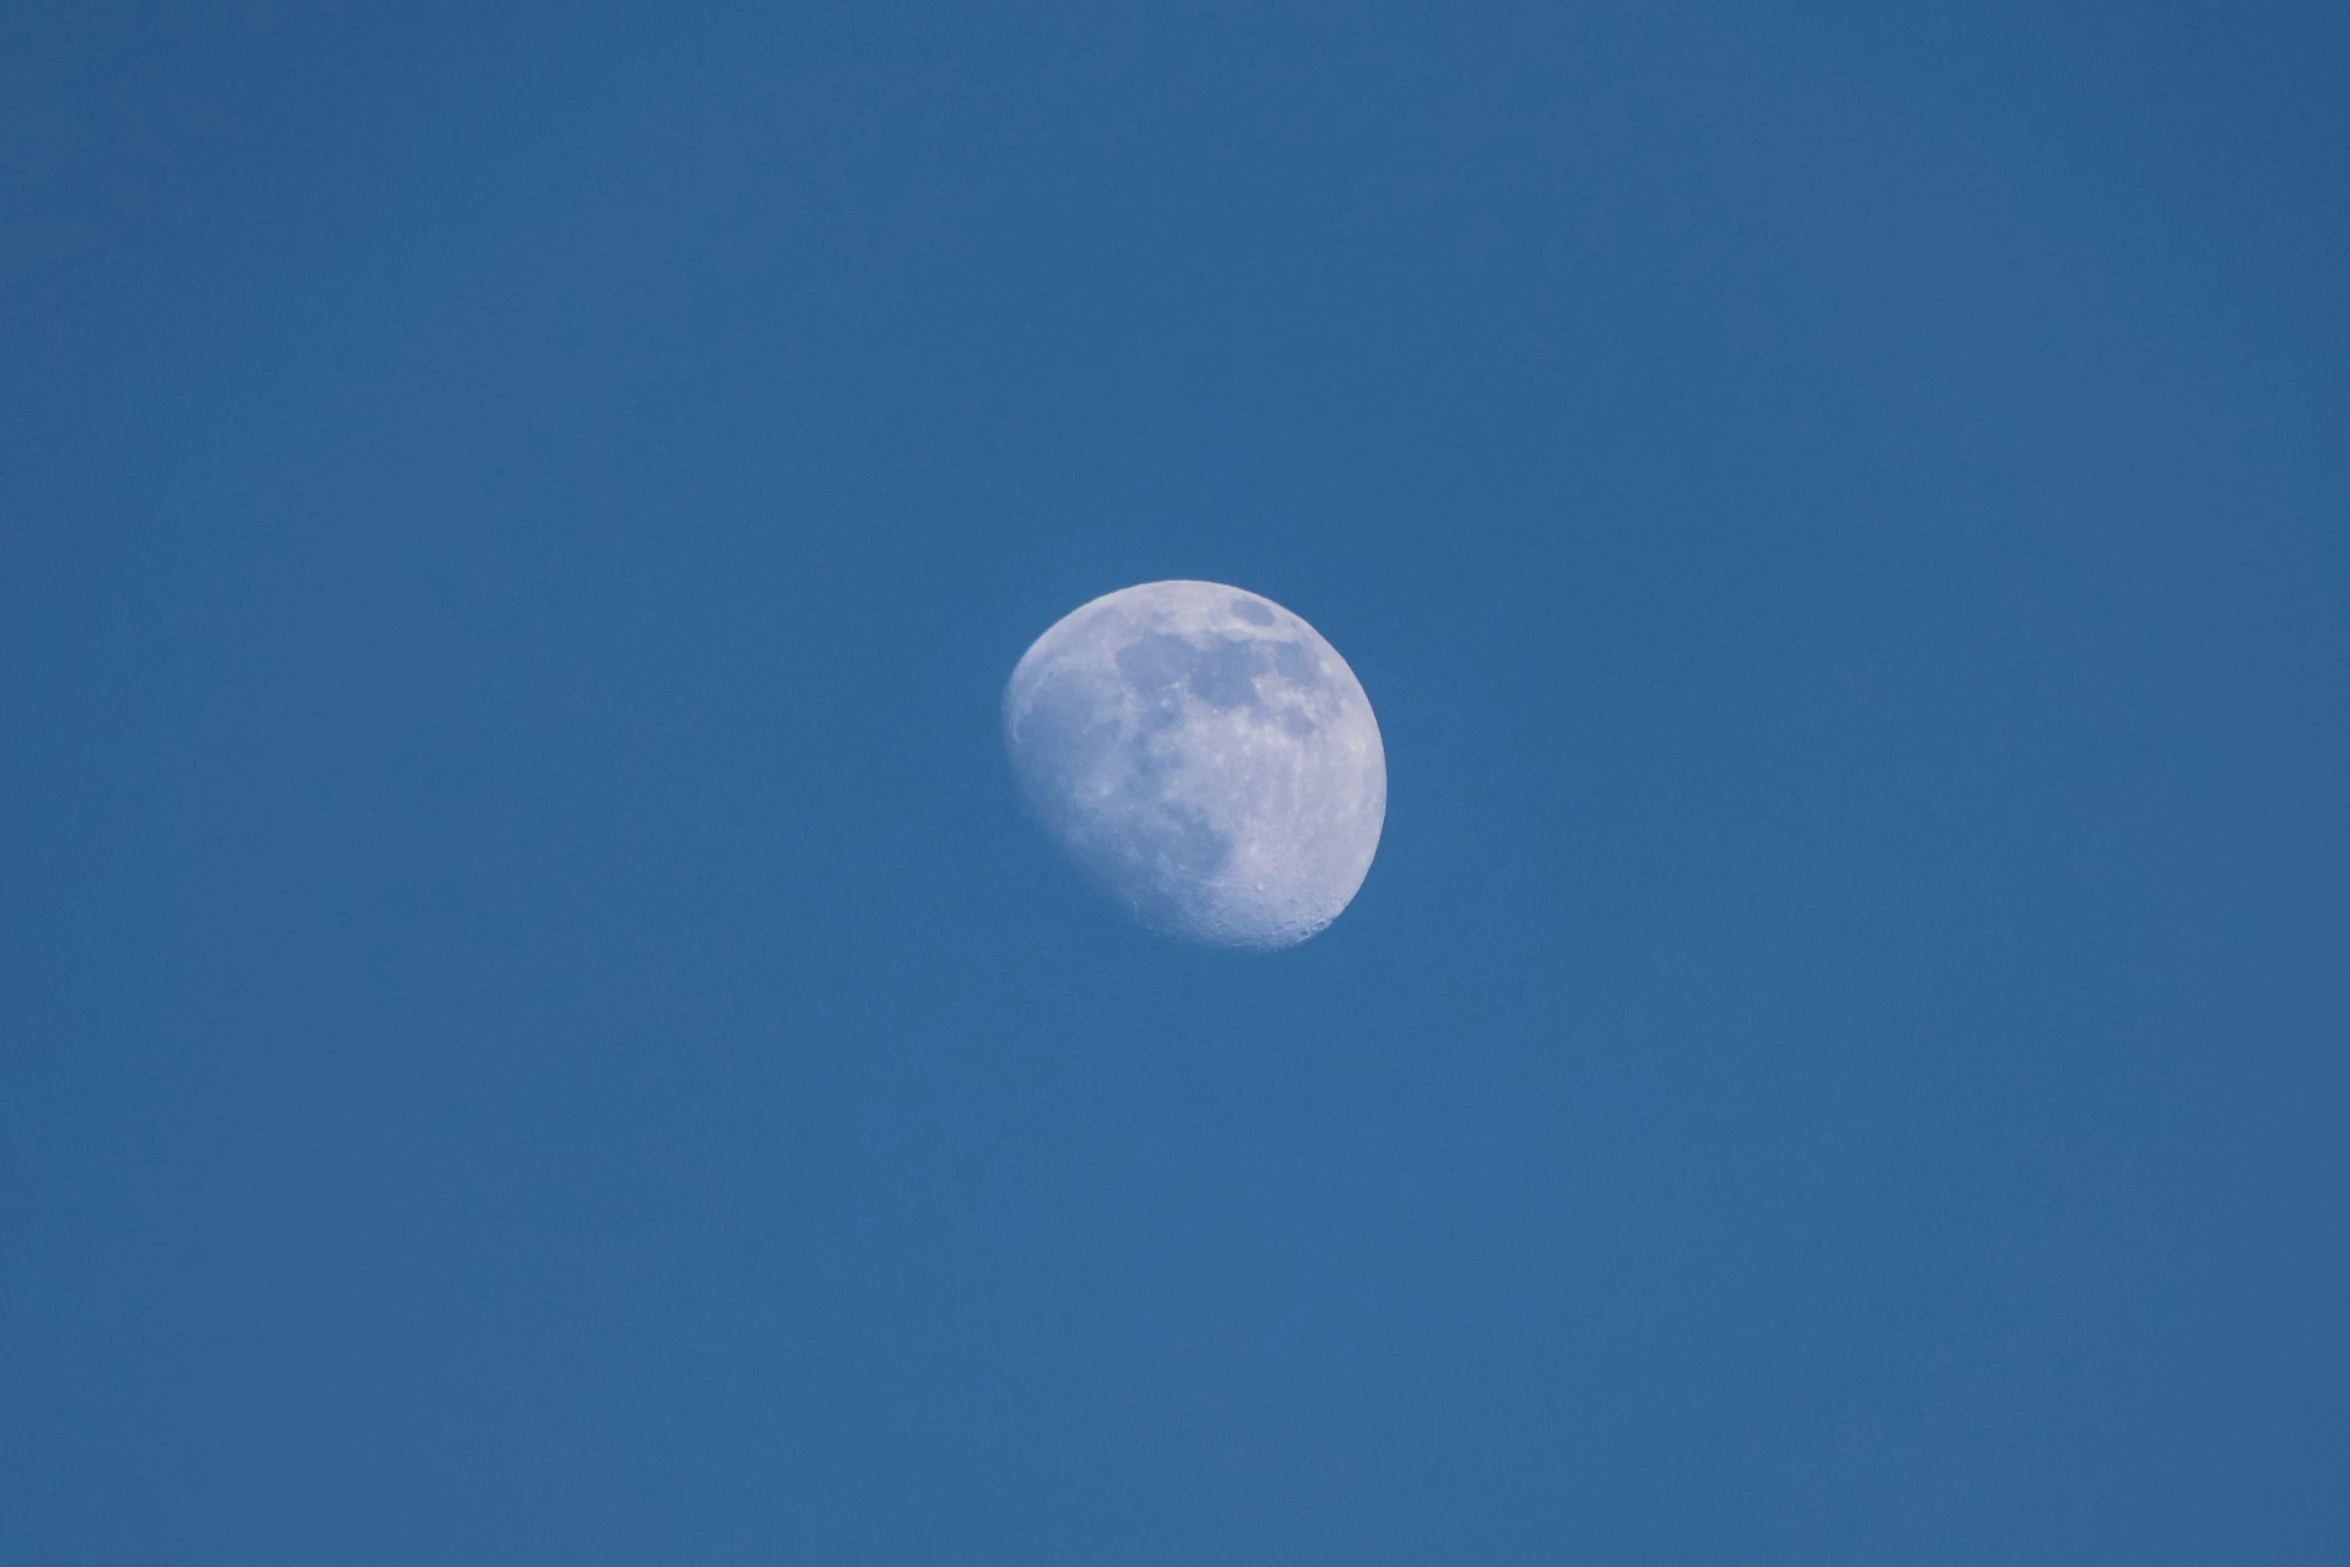 the full moon is just beginning to rise in the blue sky